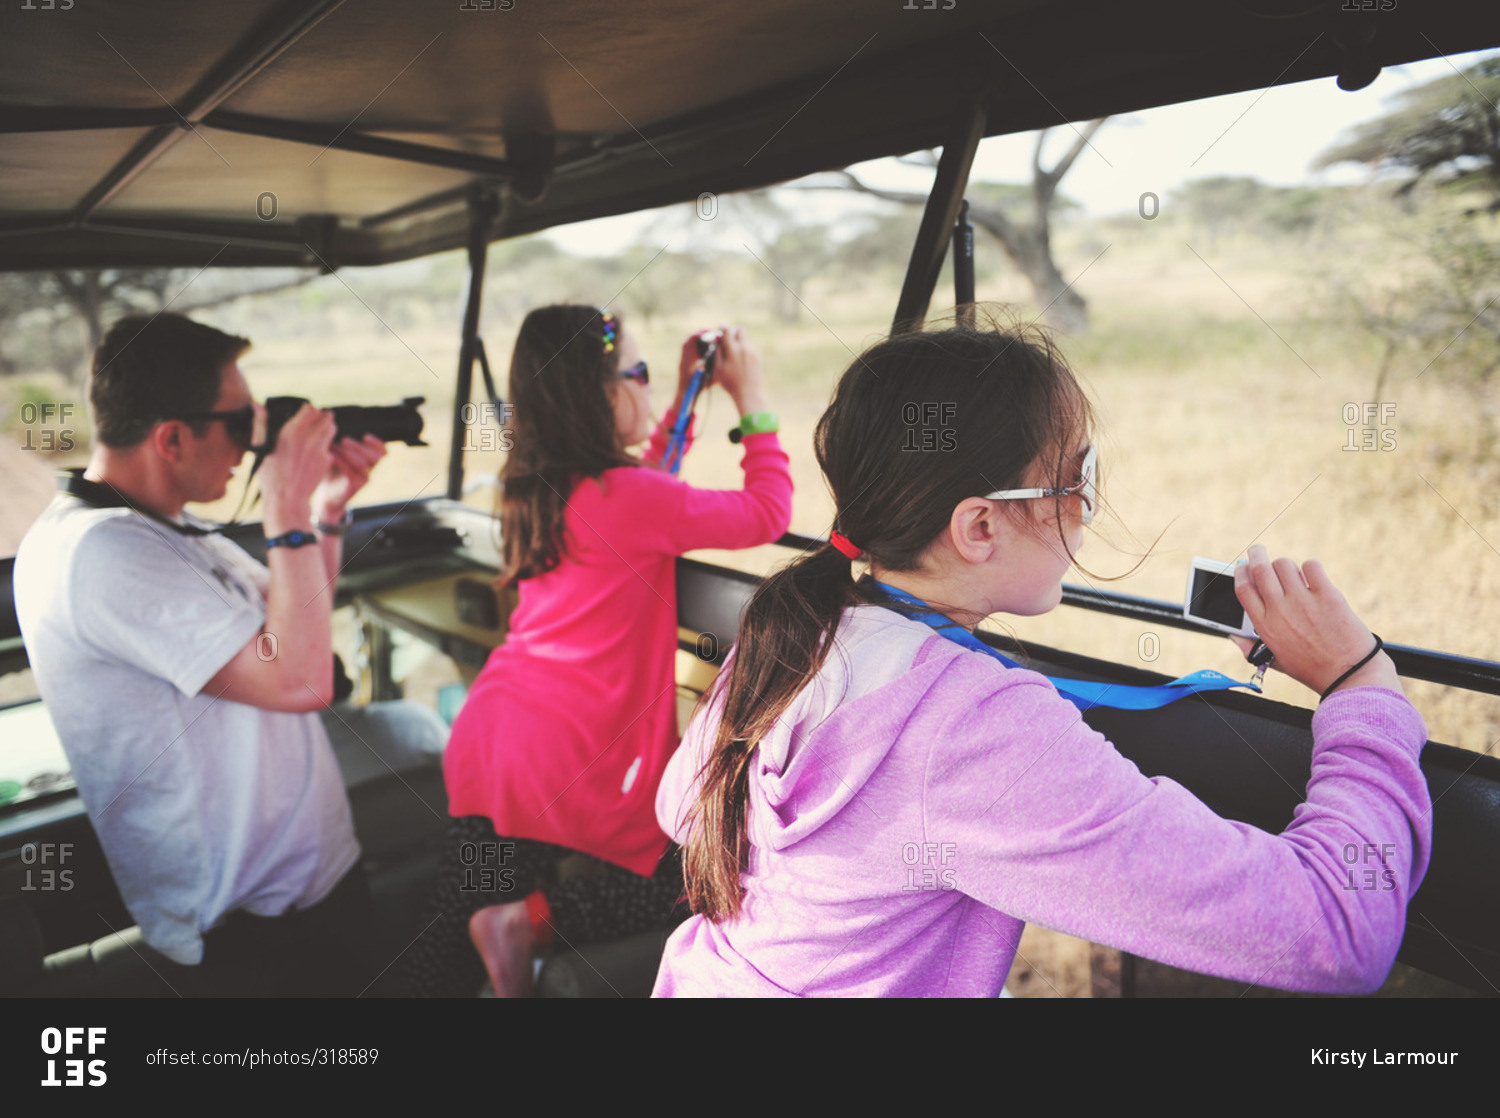 Father photographing wildlife with his daughters on safari in the African Serengeti